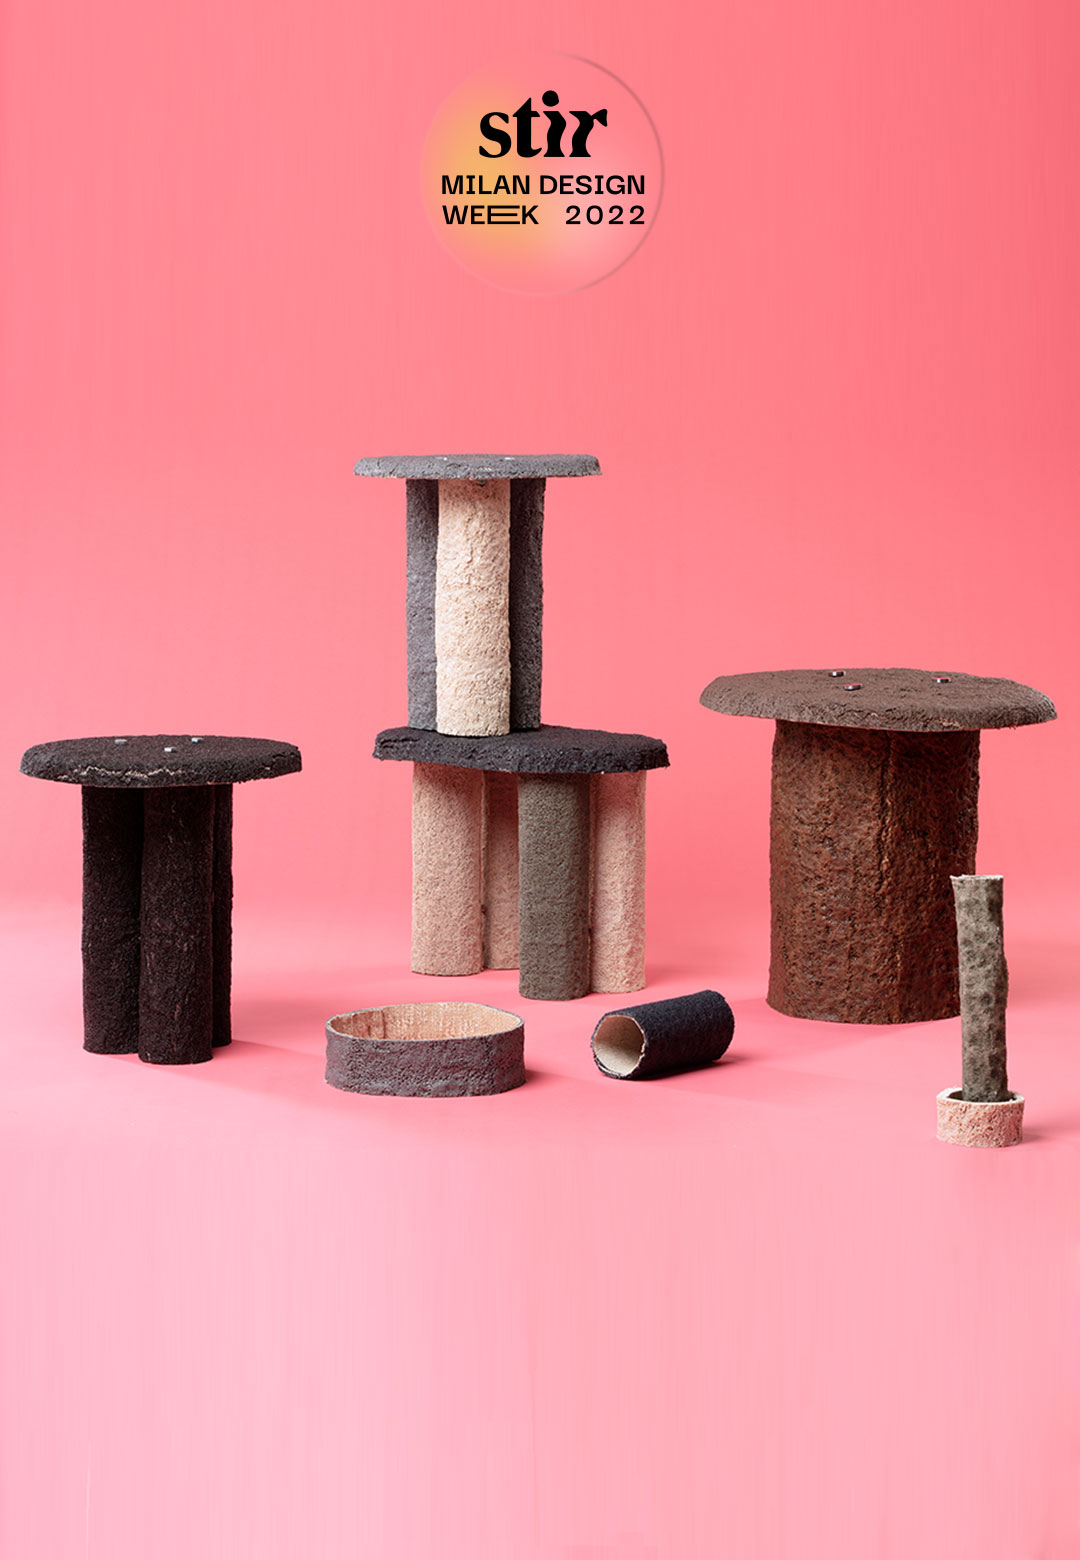 Riccardo Cenedella shapes functional indoor furniture from carpet waste